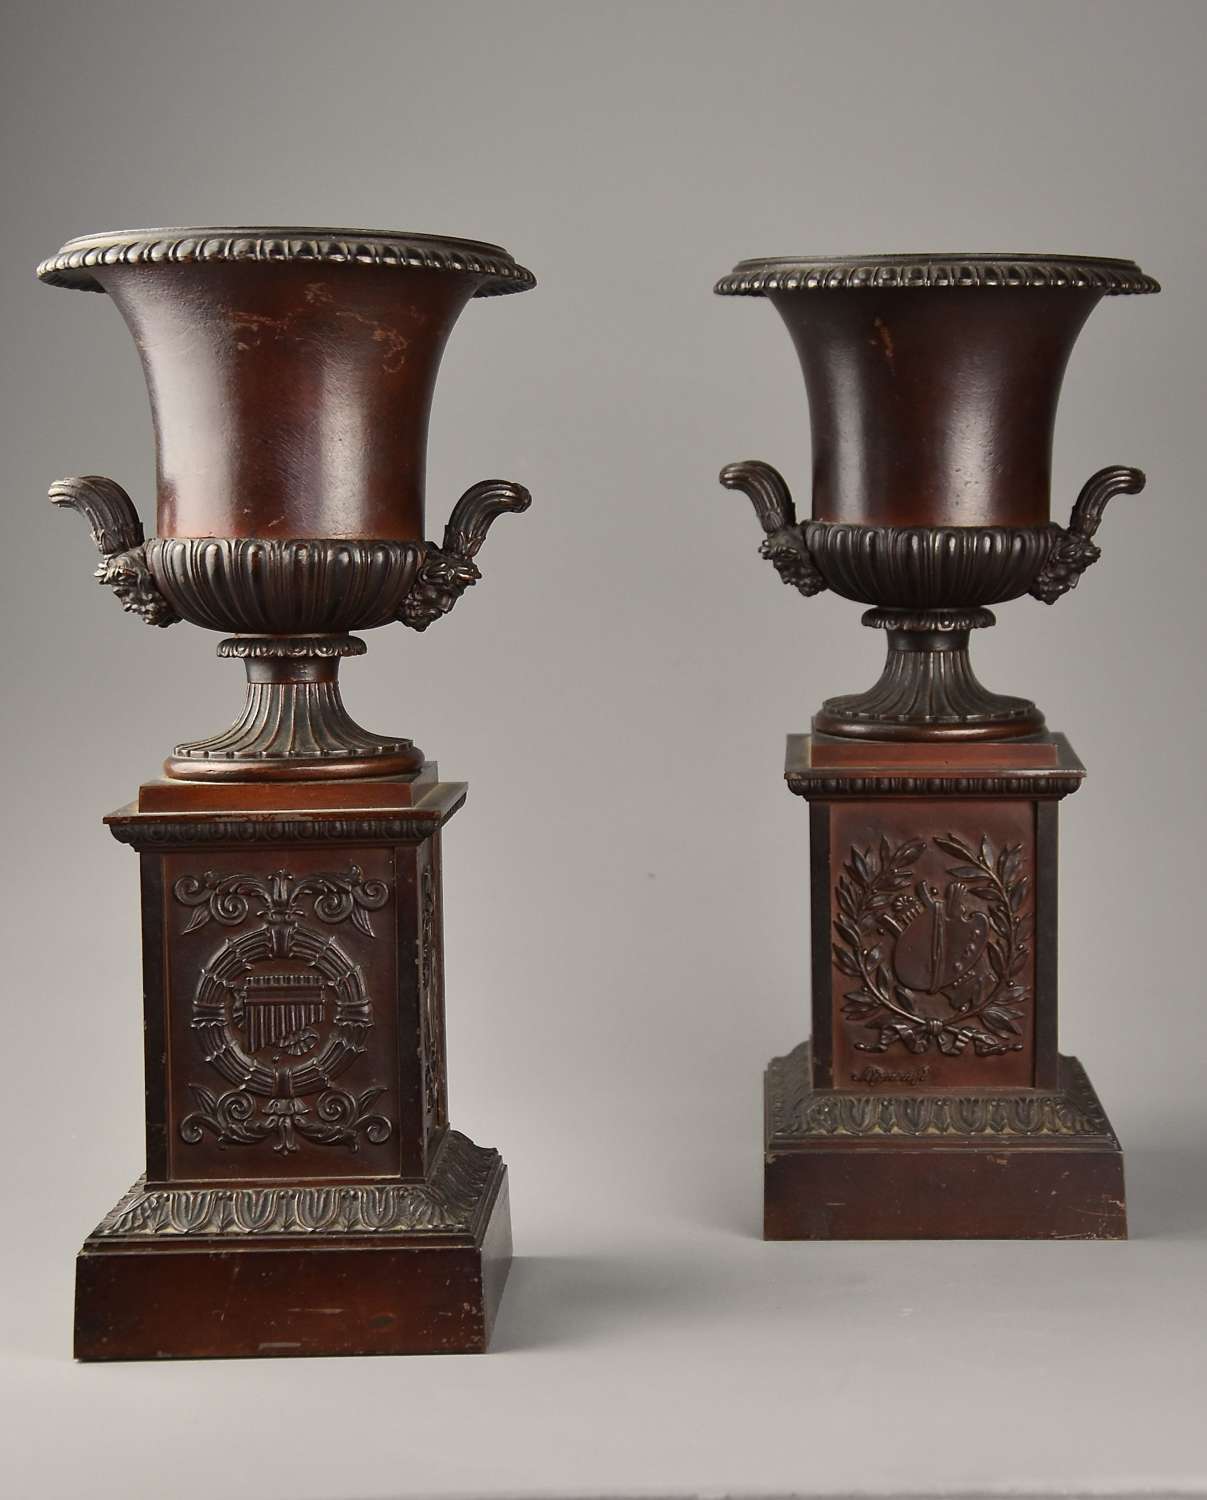 Pair of French late 19thc spelter campana urns on plinth bases